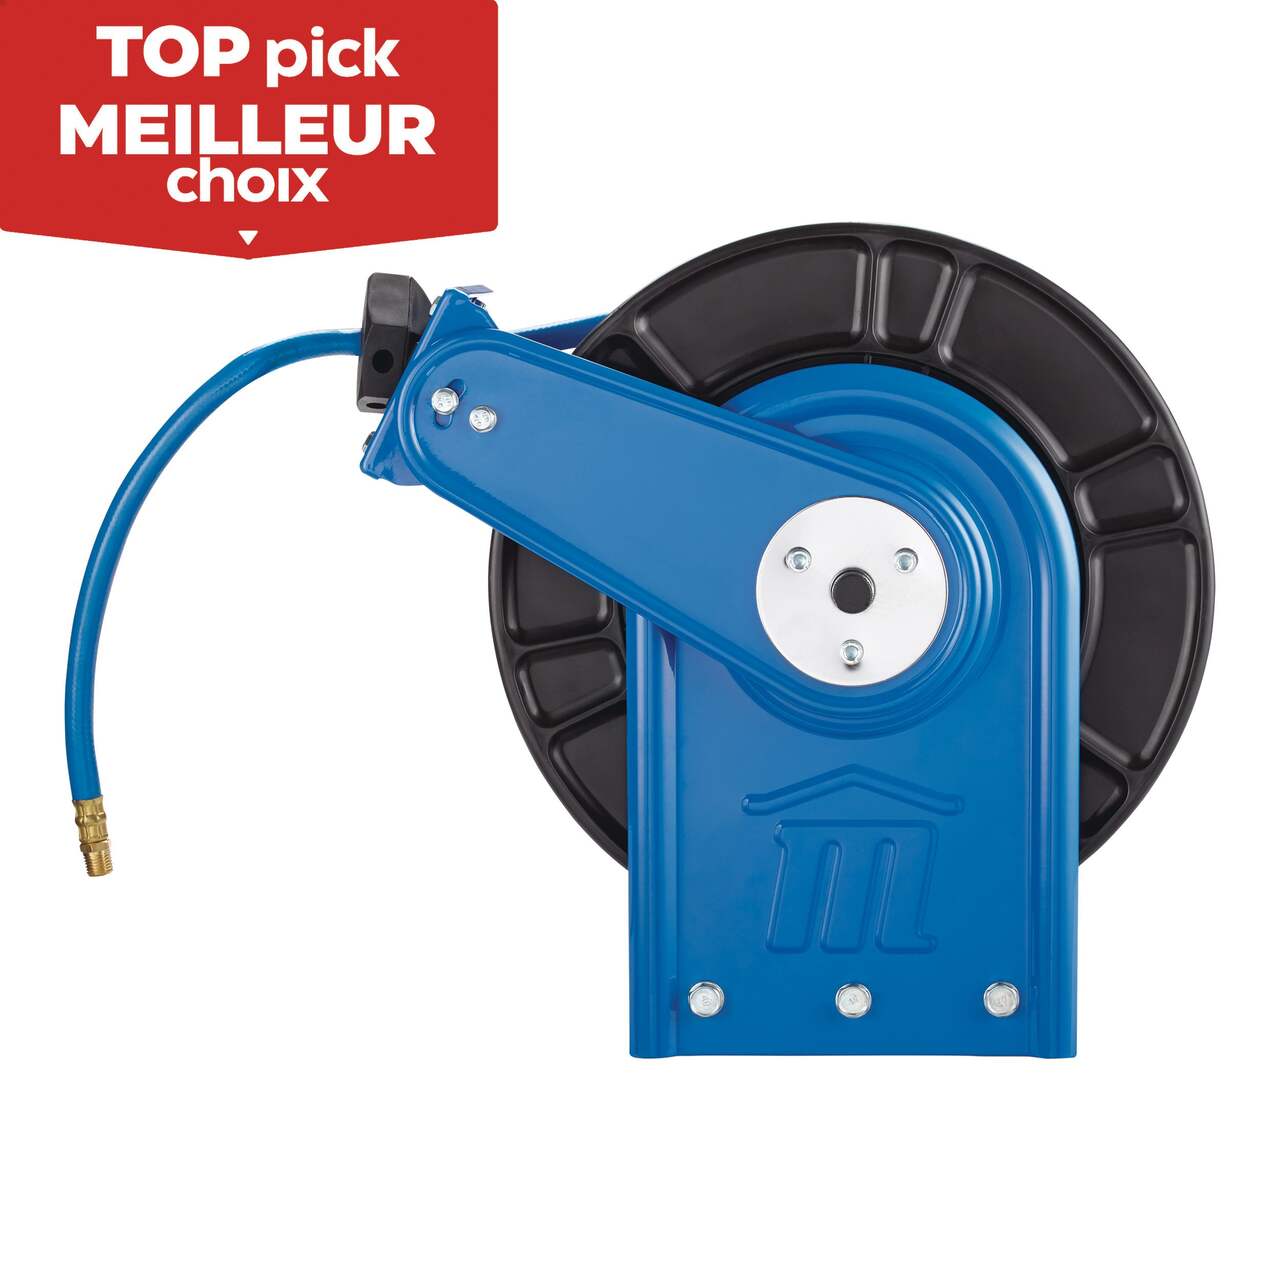 https://media-www.canadiantire.ca/product/fixing/tools/air-tools-accessories/0588395/mastercraft-3-8-x50-pvc-hose-and-reel-35f577b2-27b8-4dfe-a81b-9a547f72a9b5-jpgrendition.jpg?imdensity=1&imwidth=640&impolicy=mZoom